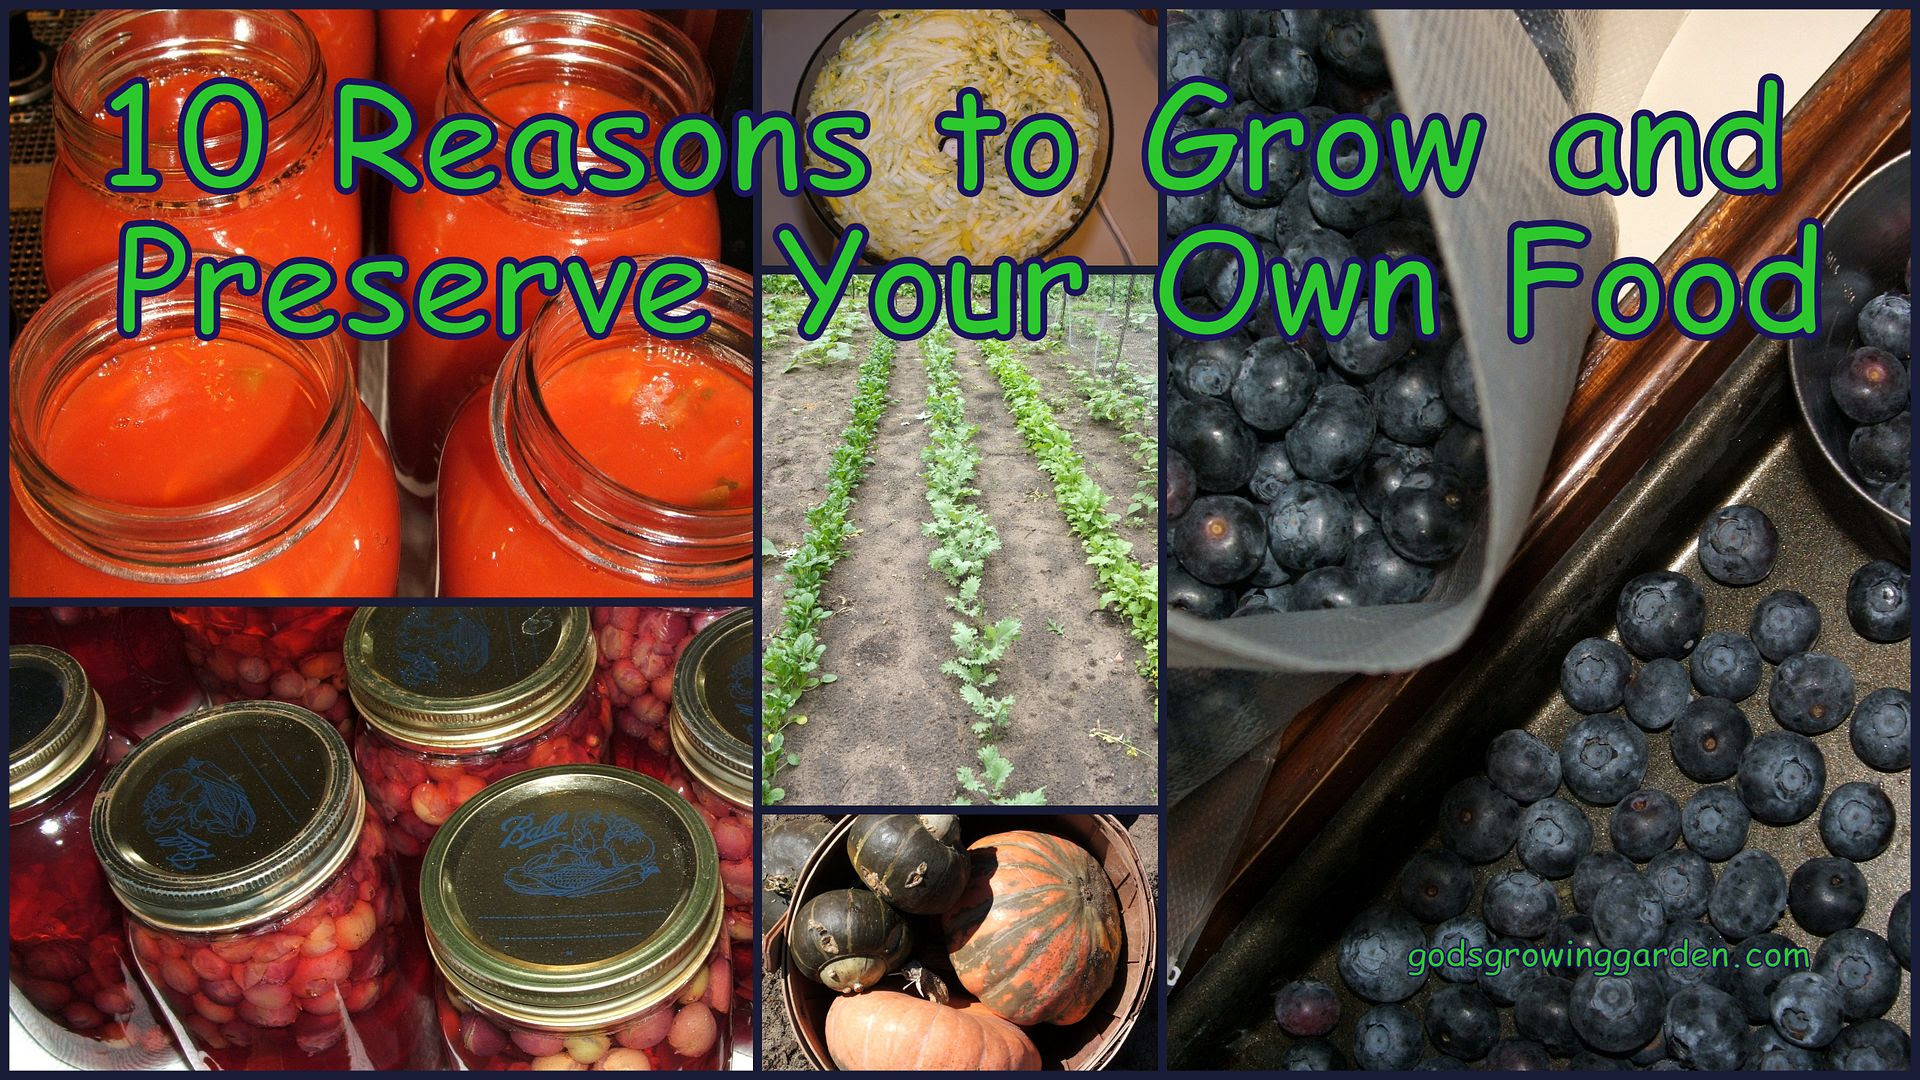 10 Reasons, by Angie Ouellette-Tower for godsgrowinggarden.com